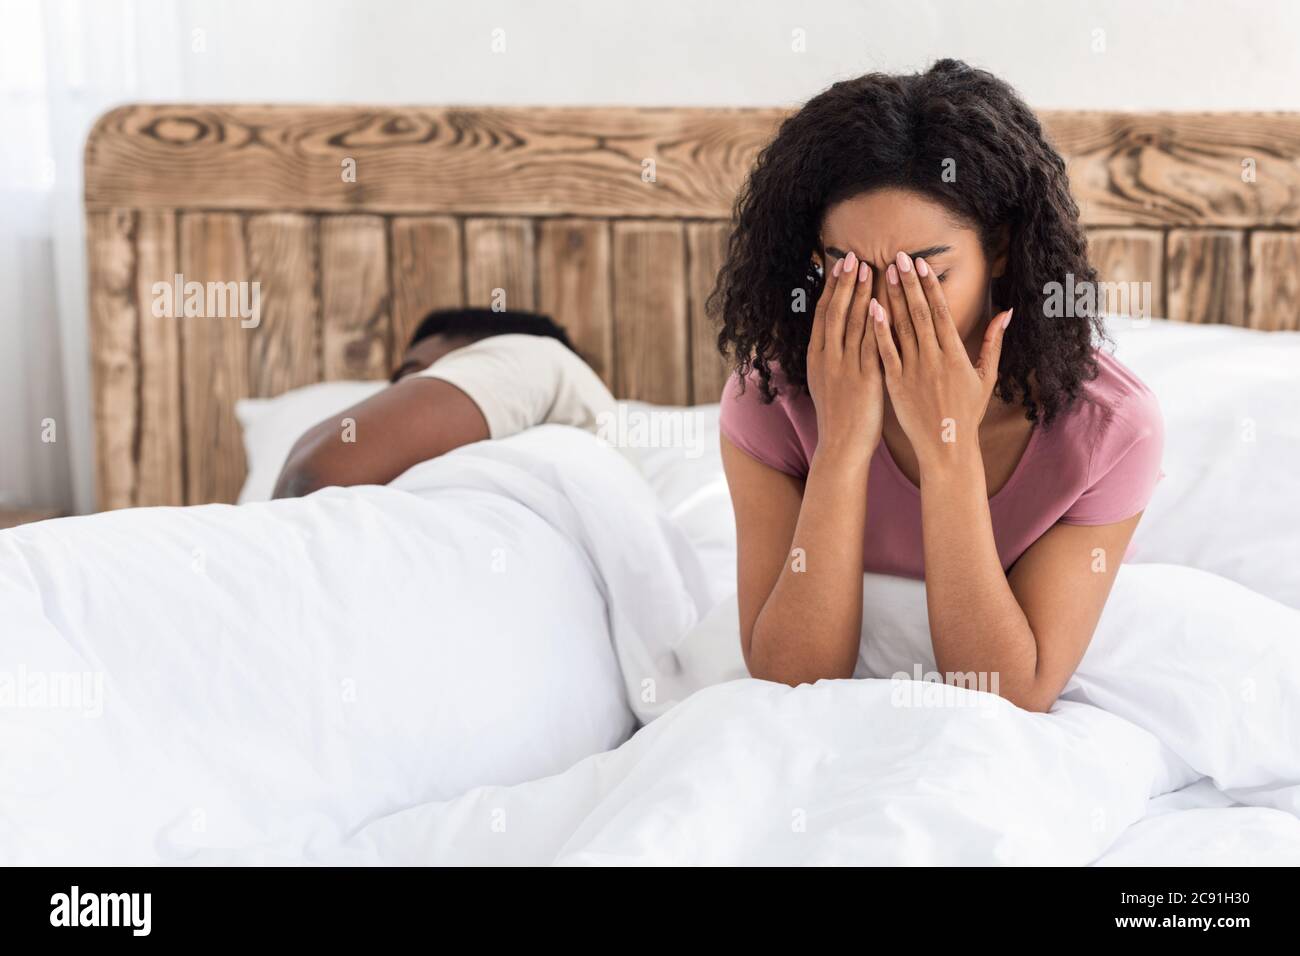 Crying african woman sitting on bed next to sleeping man Stock Photo